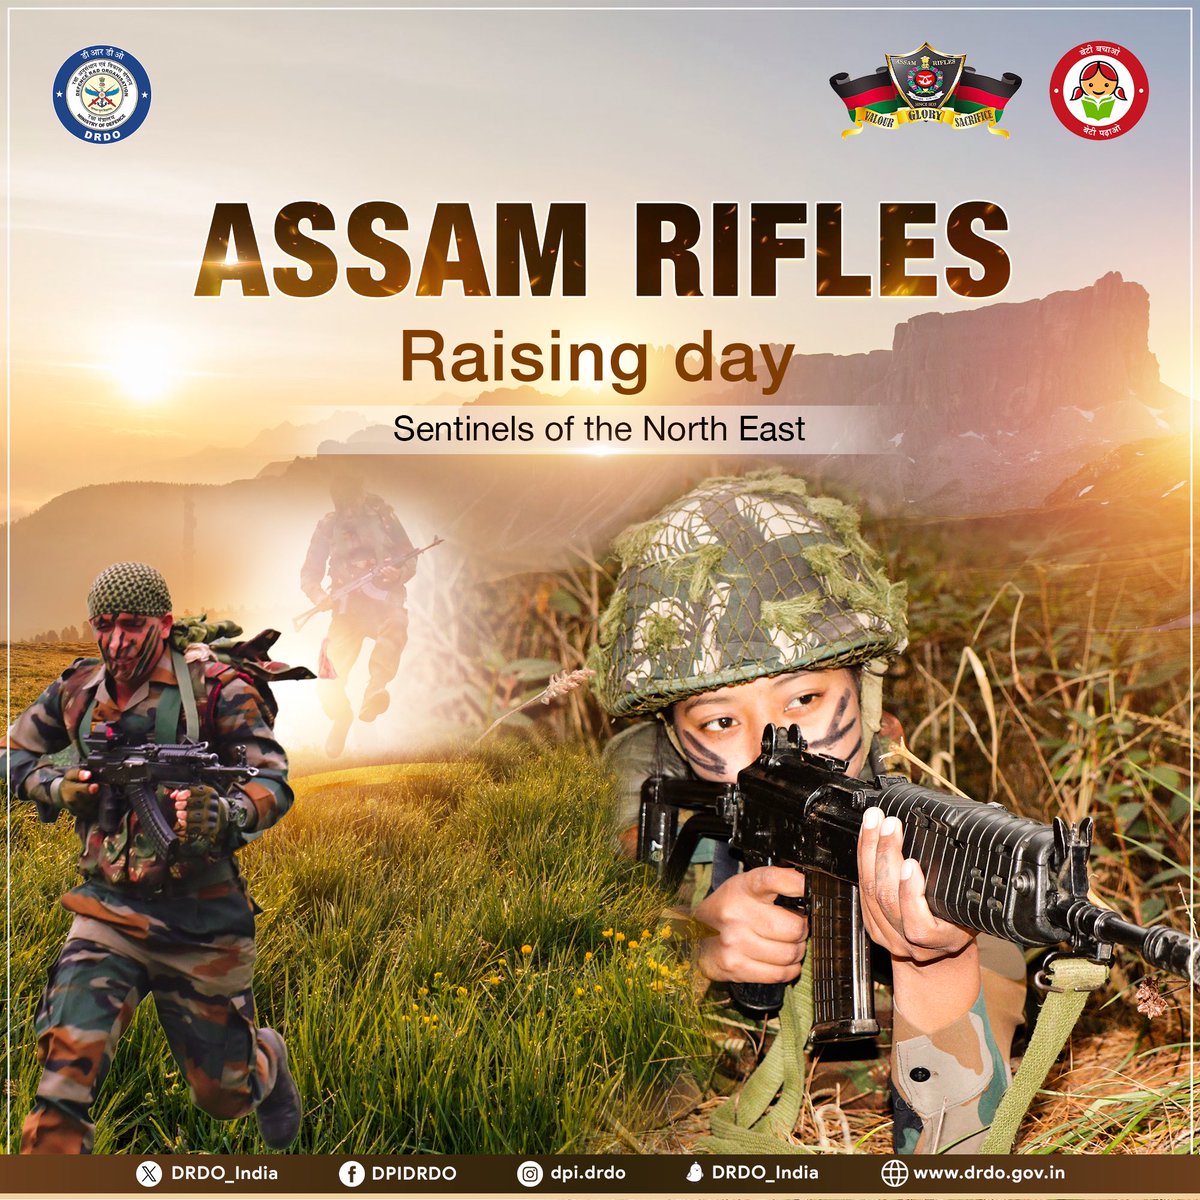 DRDO wishes warm greetings to All Ranks of Assam Rifles and their families on the 189th Raising Day of #AssamRifles. Their  unwavering courage and remarkable selfless spirit have ensured peace and economic prosperity in NE region. @HMOIndia